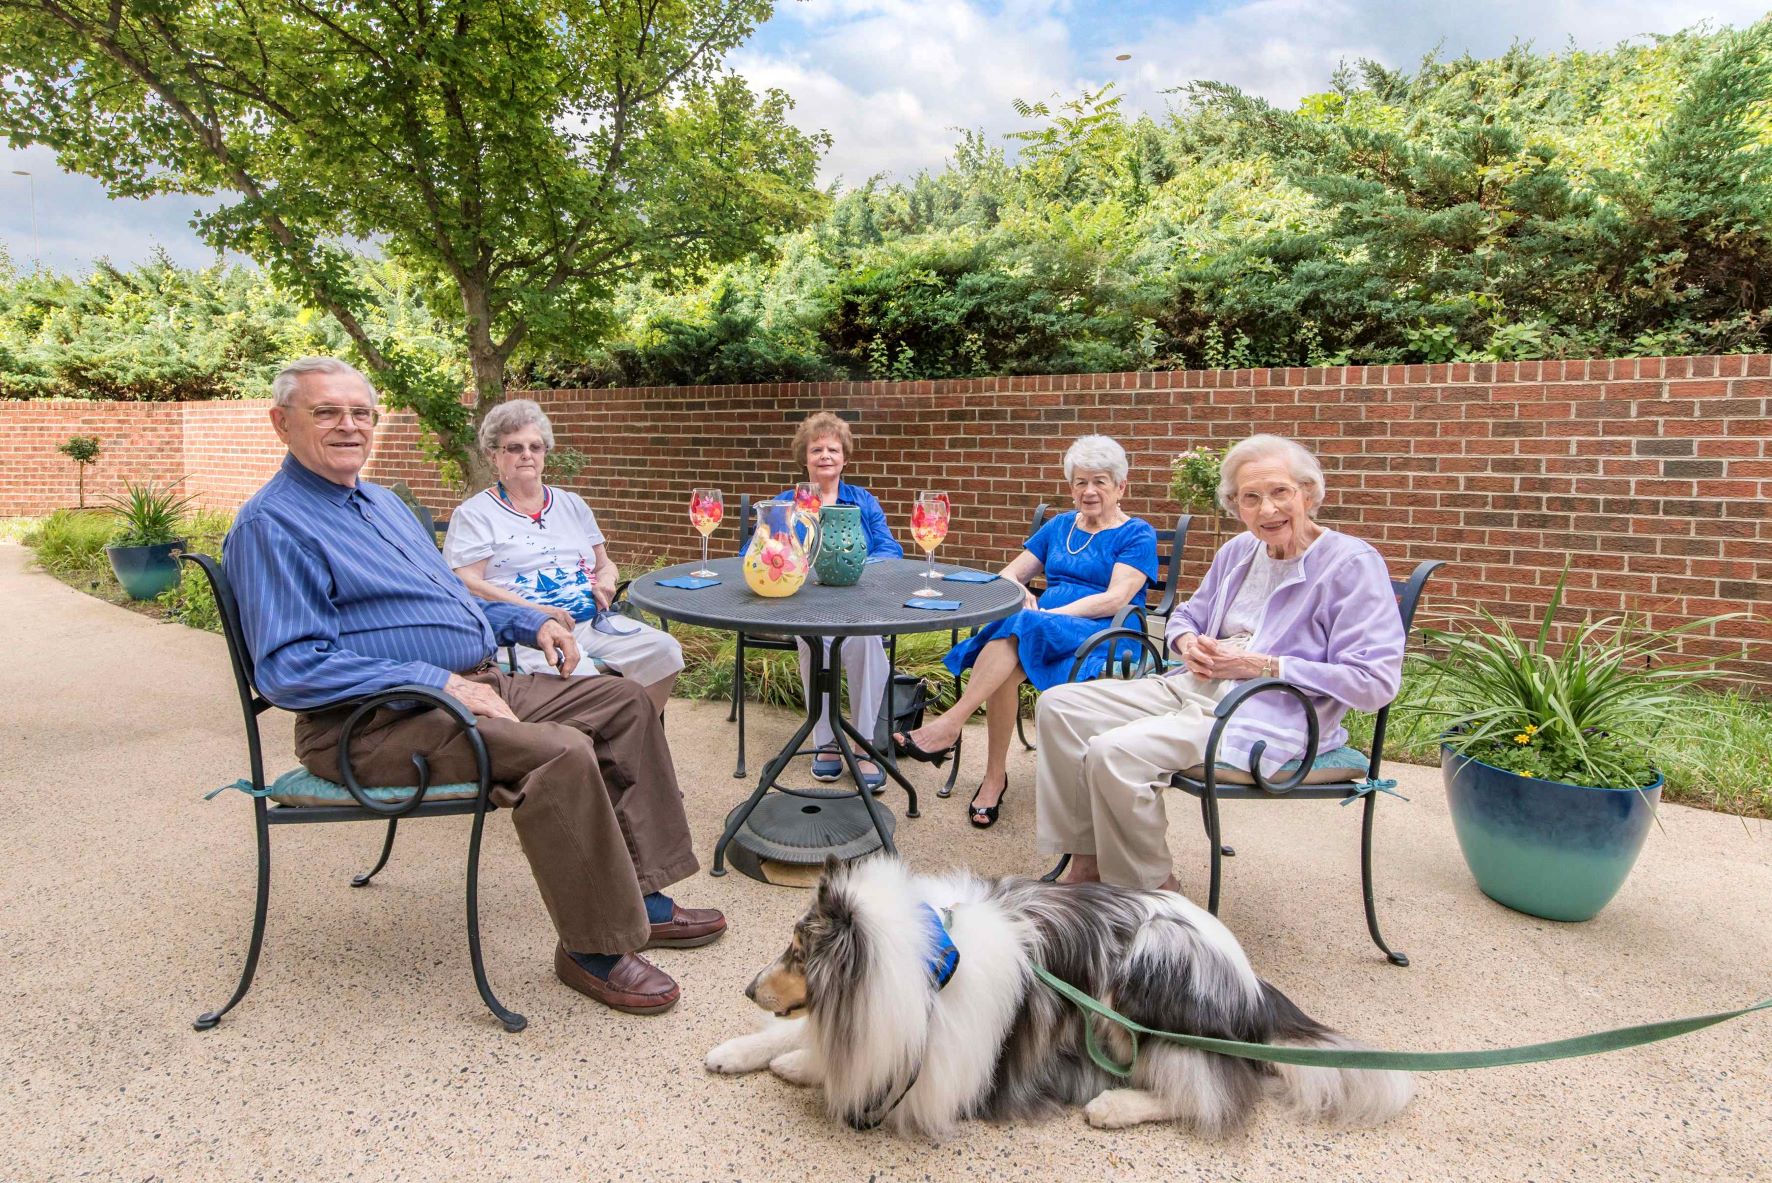 Morningside of Charlottesville offers plenty of outdoor space to enjoy with other residents and visitors.